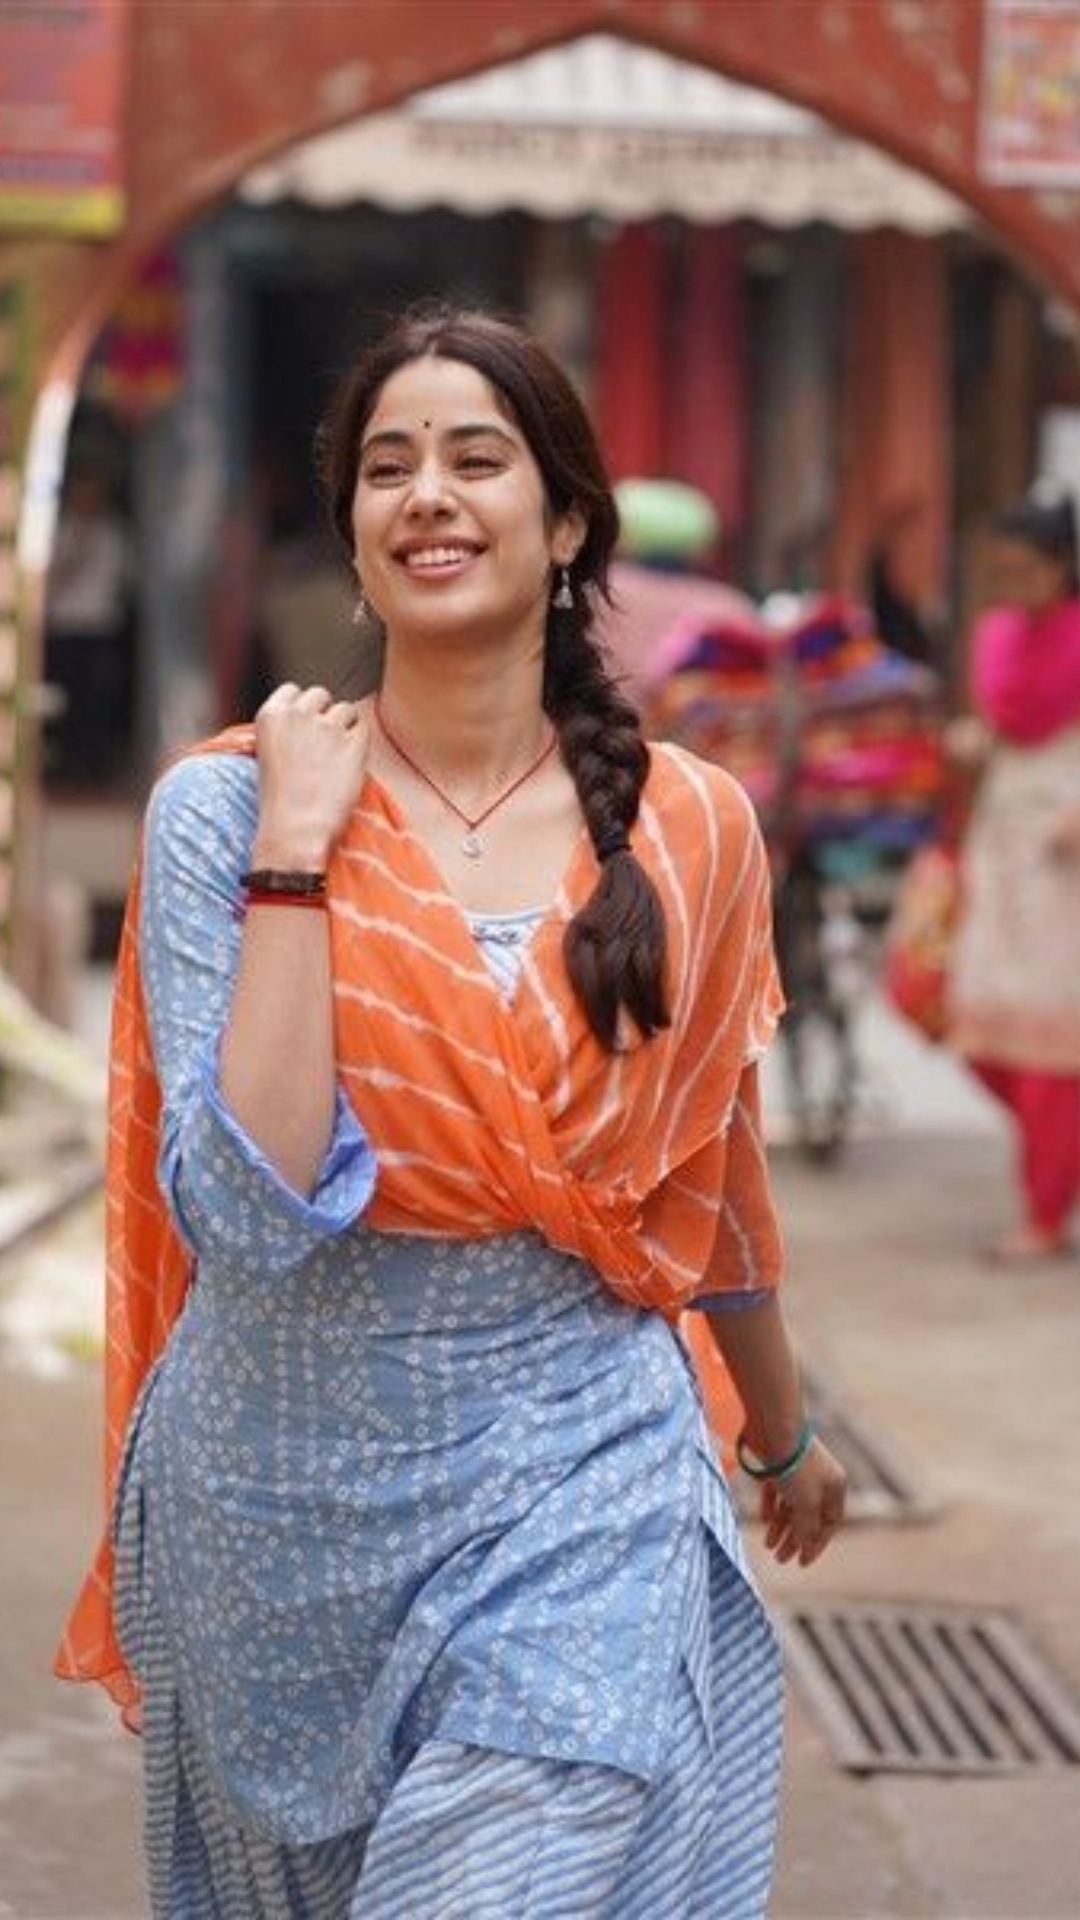 Janhvi Kapoor's best performances over the years